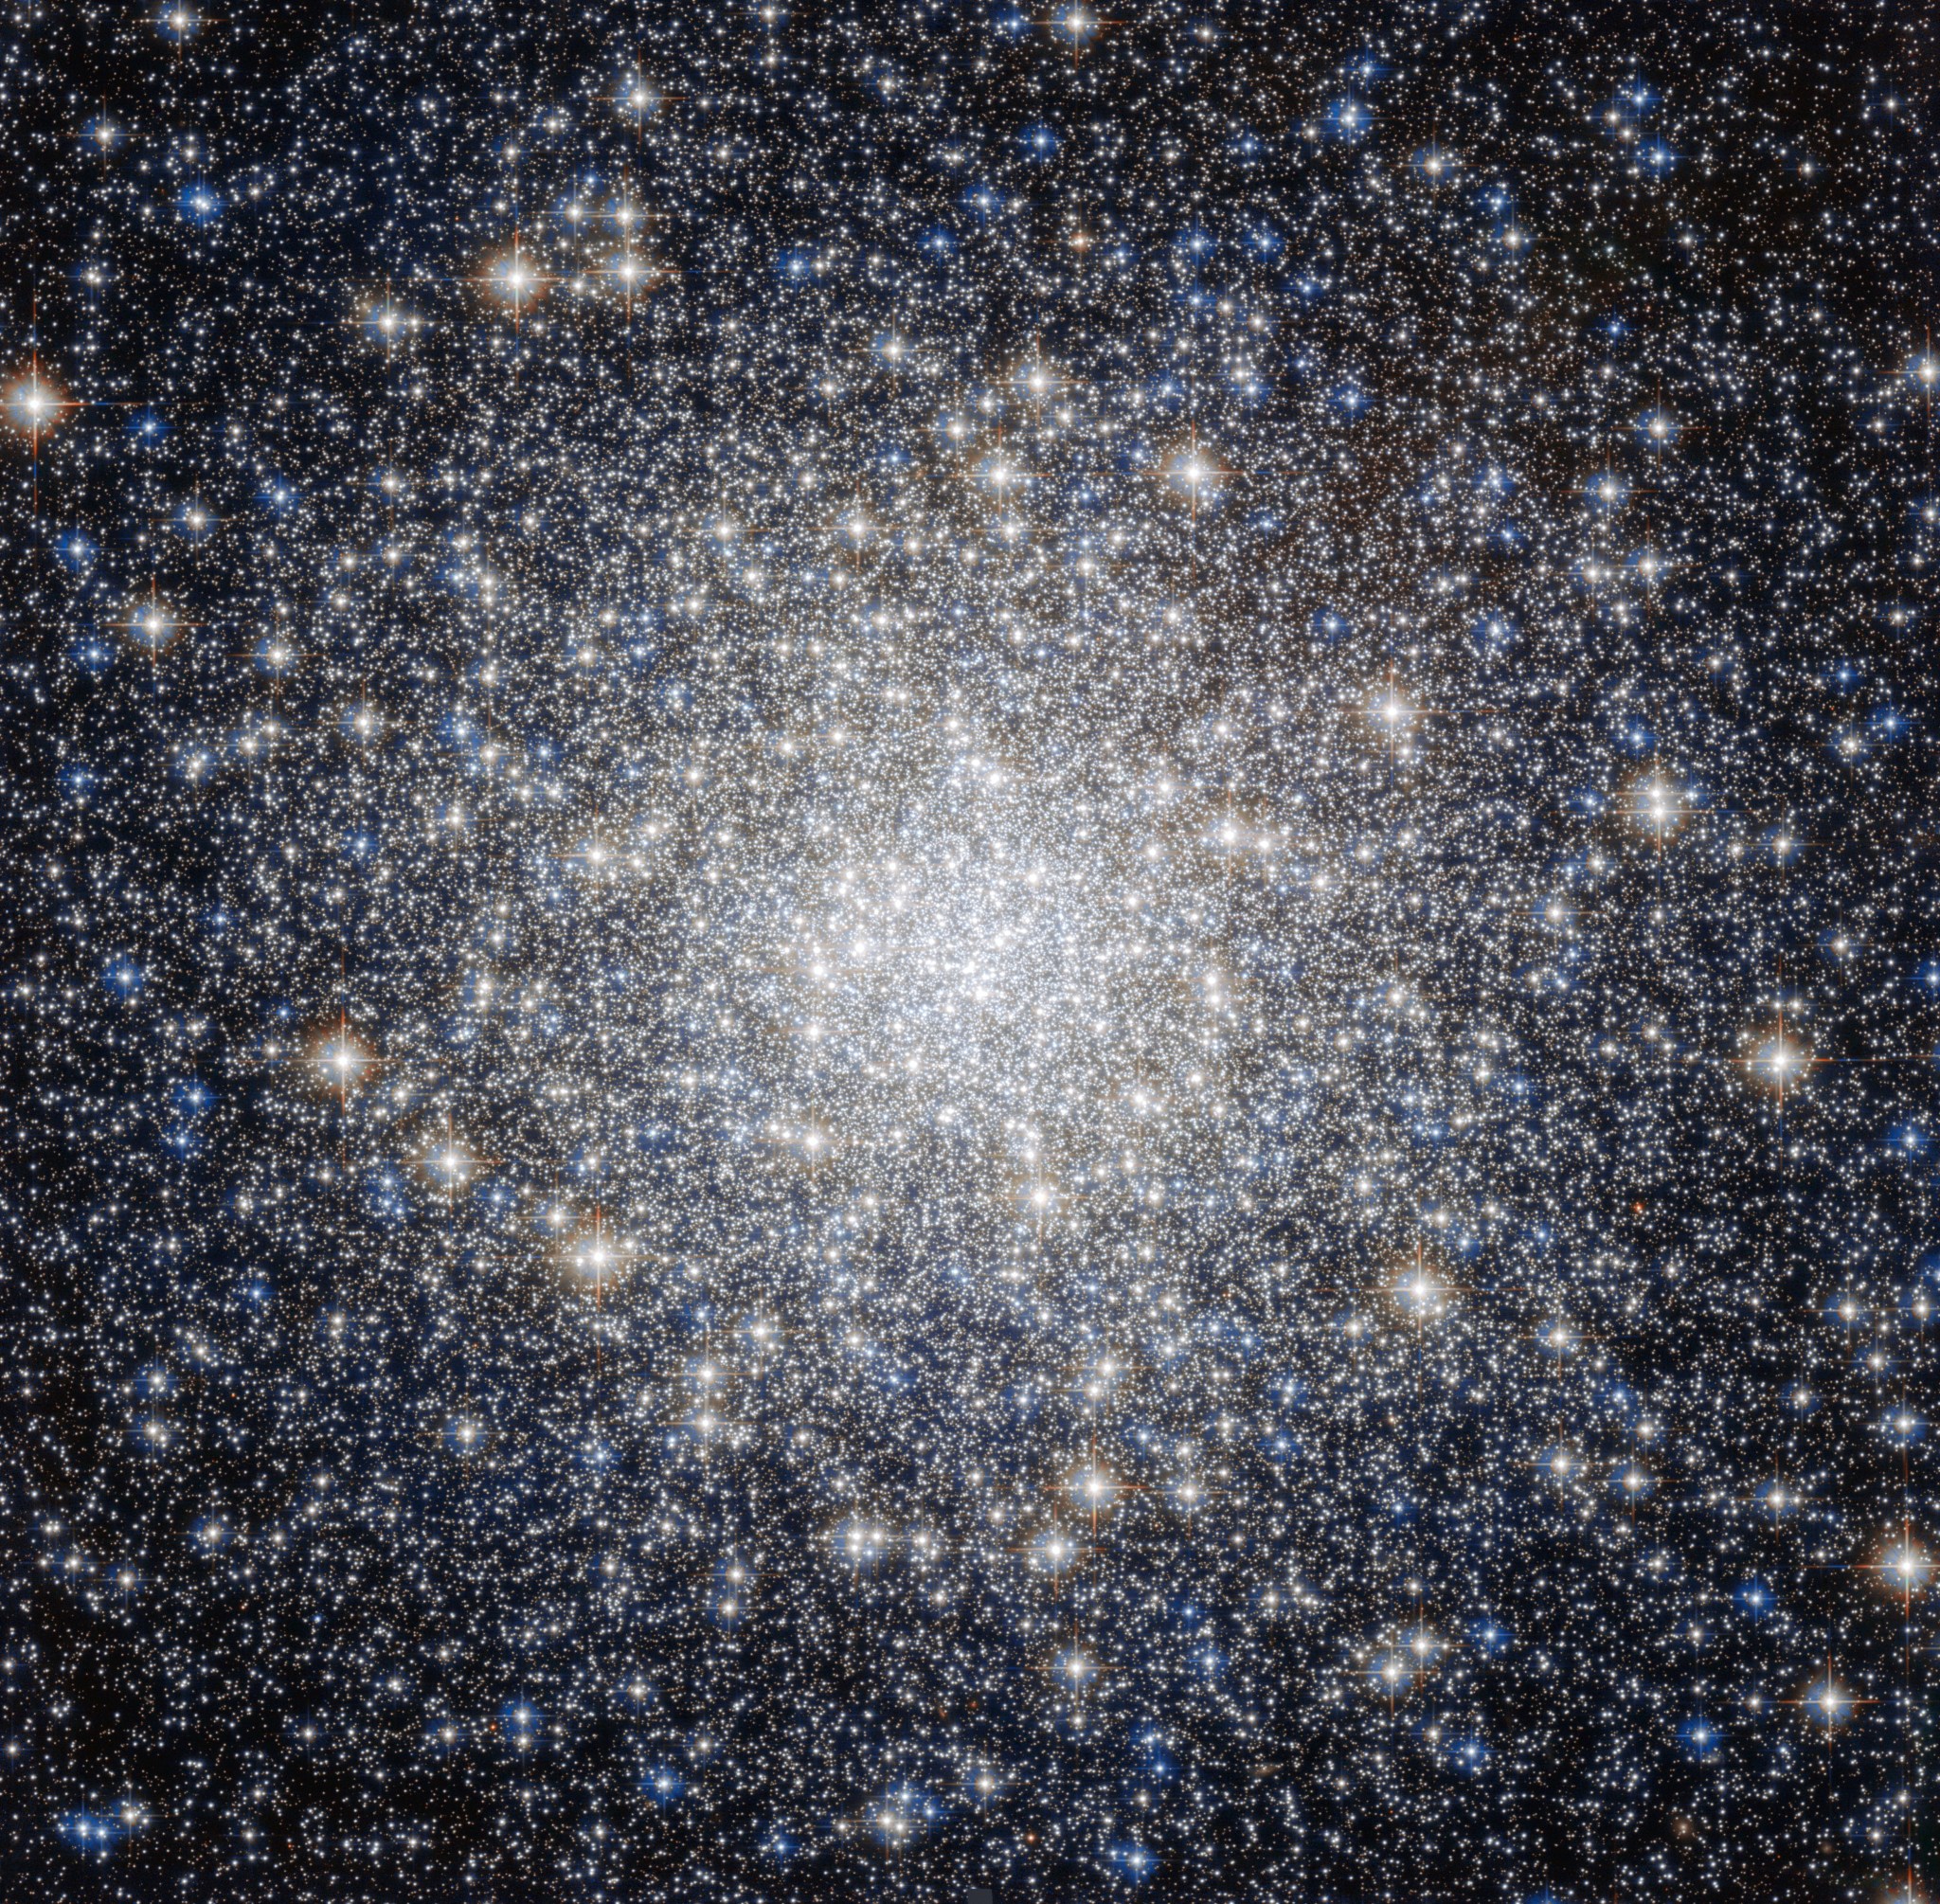 This image from NASA’s Hubble Space Telescope shows the heart of the globular star cluster Messier 92 (M92).